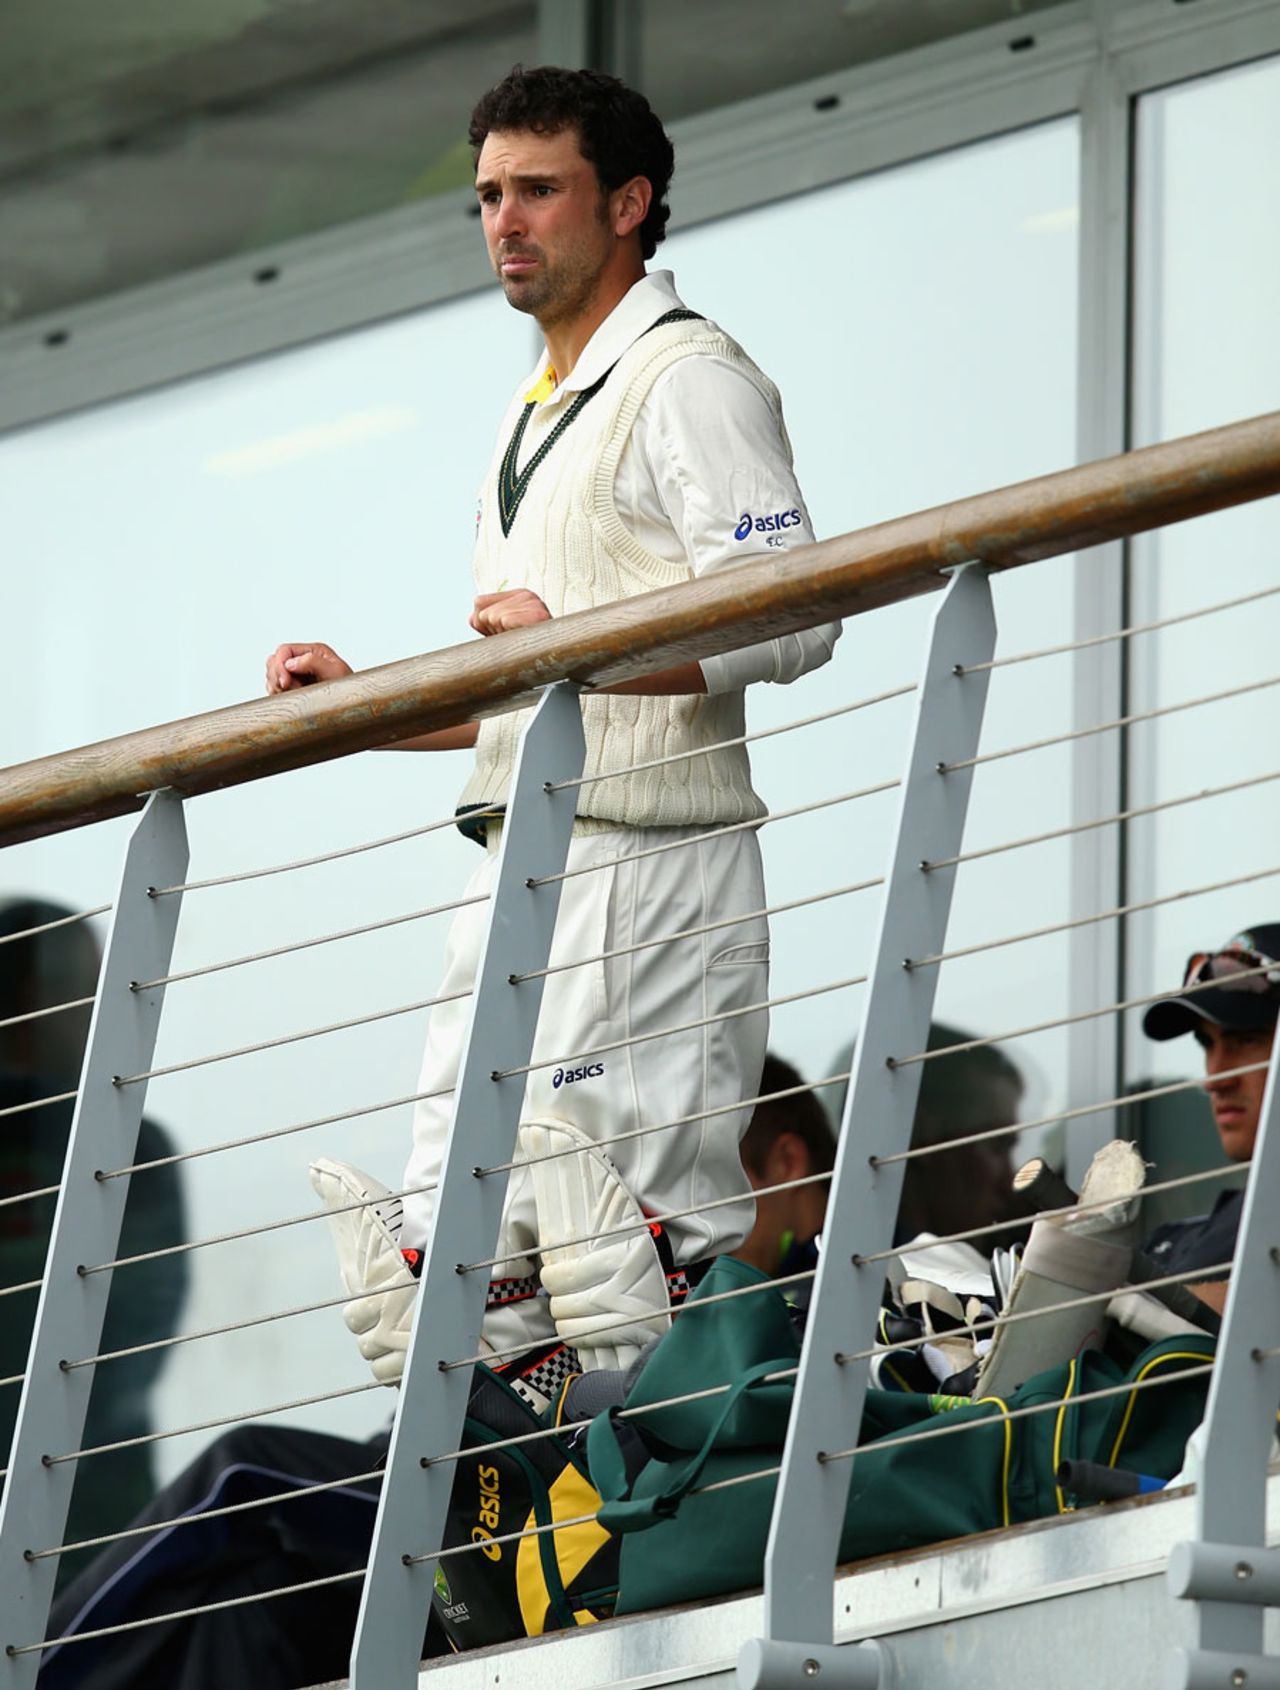 Ed Cowan looks on from the pavilion, Worcestershire v Australians, Worcester, 1st day, July 2, 2013